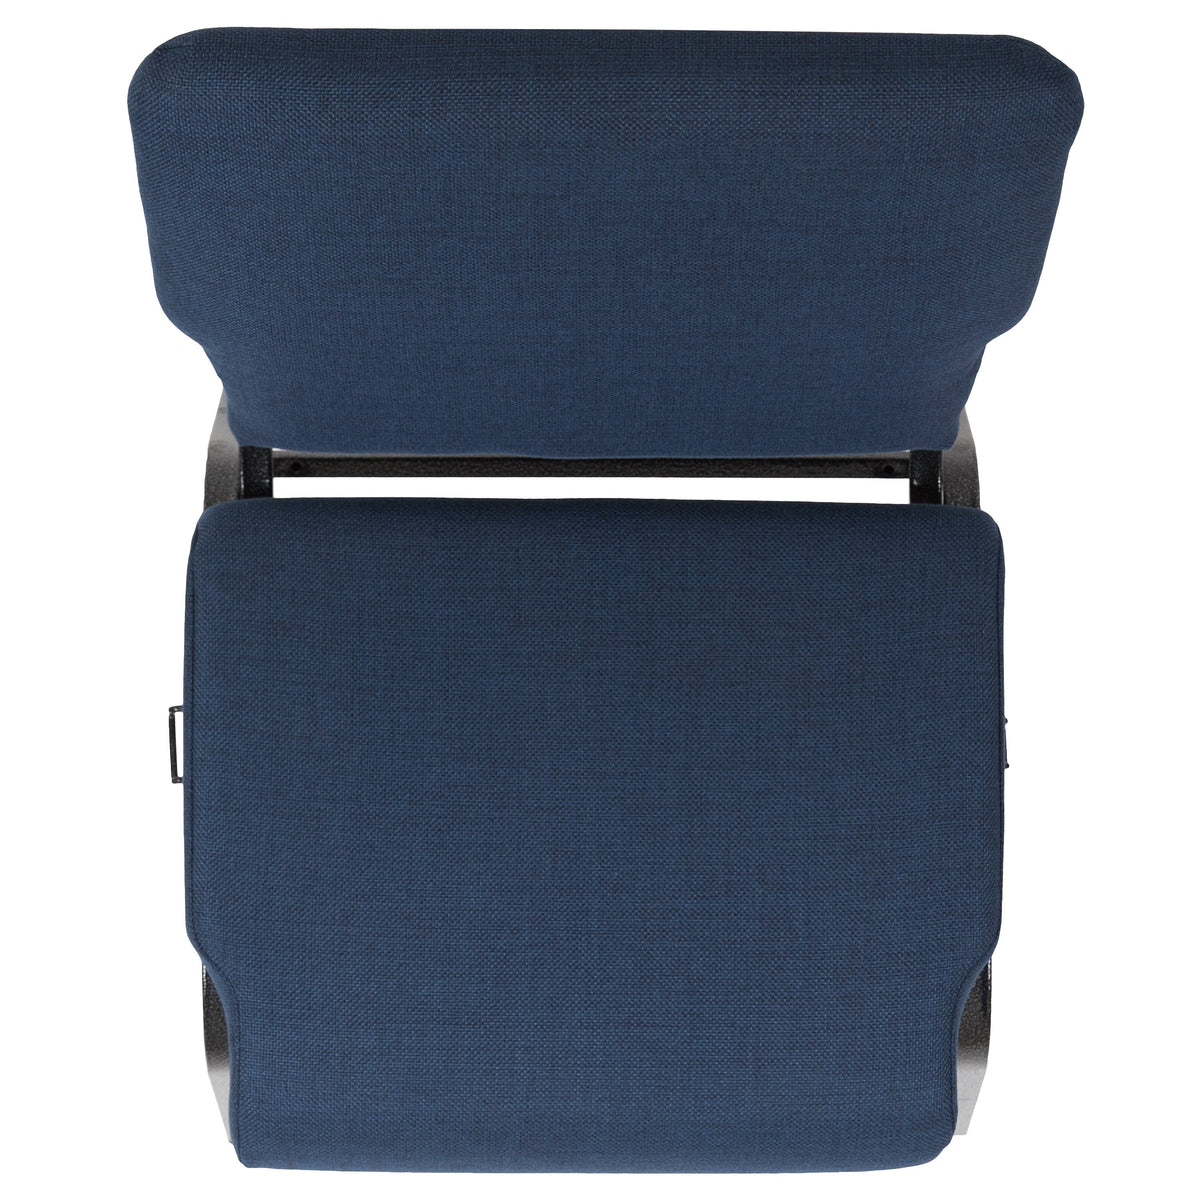 Navy Fabric/Silver Vein Frame |#| 20.5inch Navy Molded Foam Stacking Church Chair